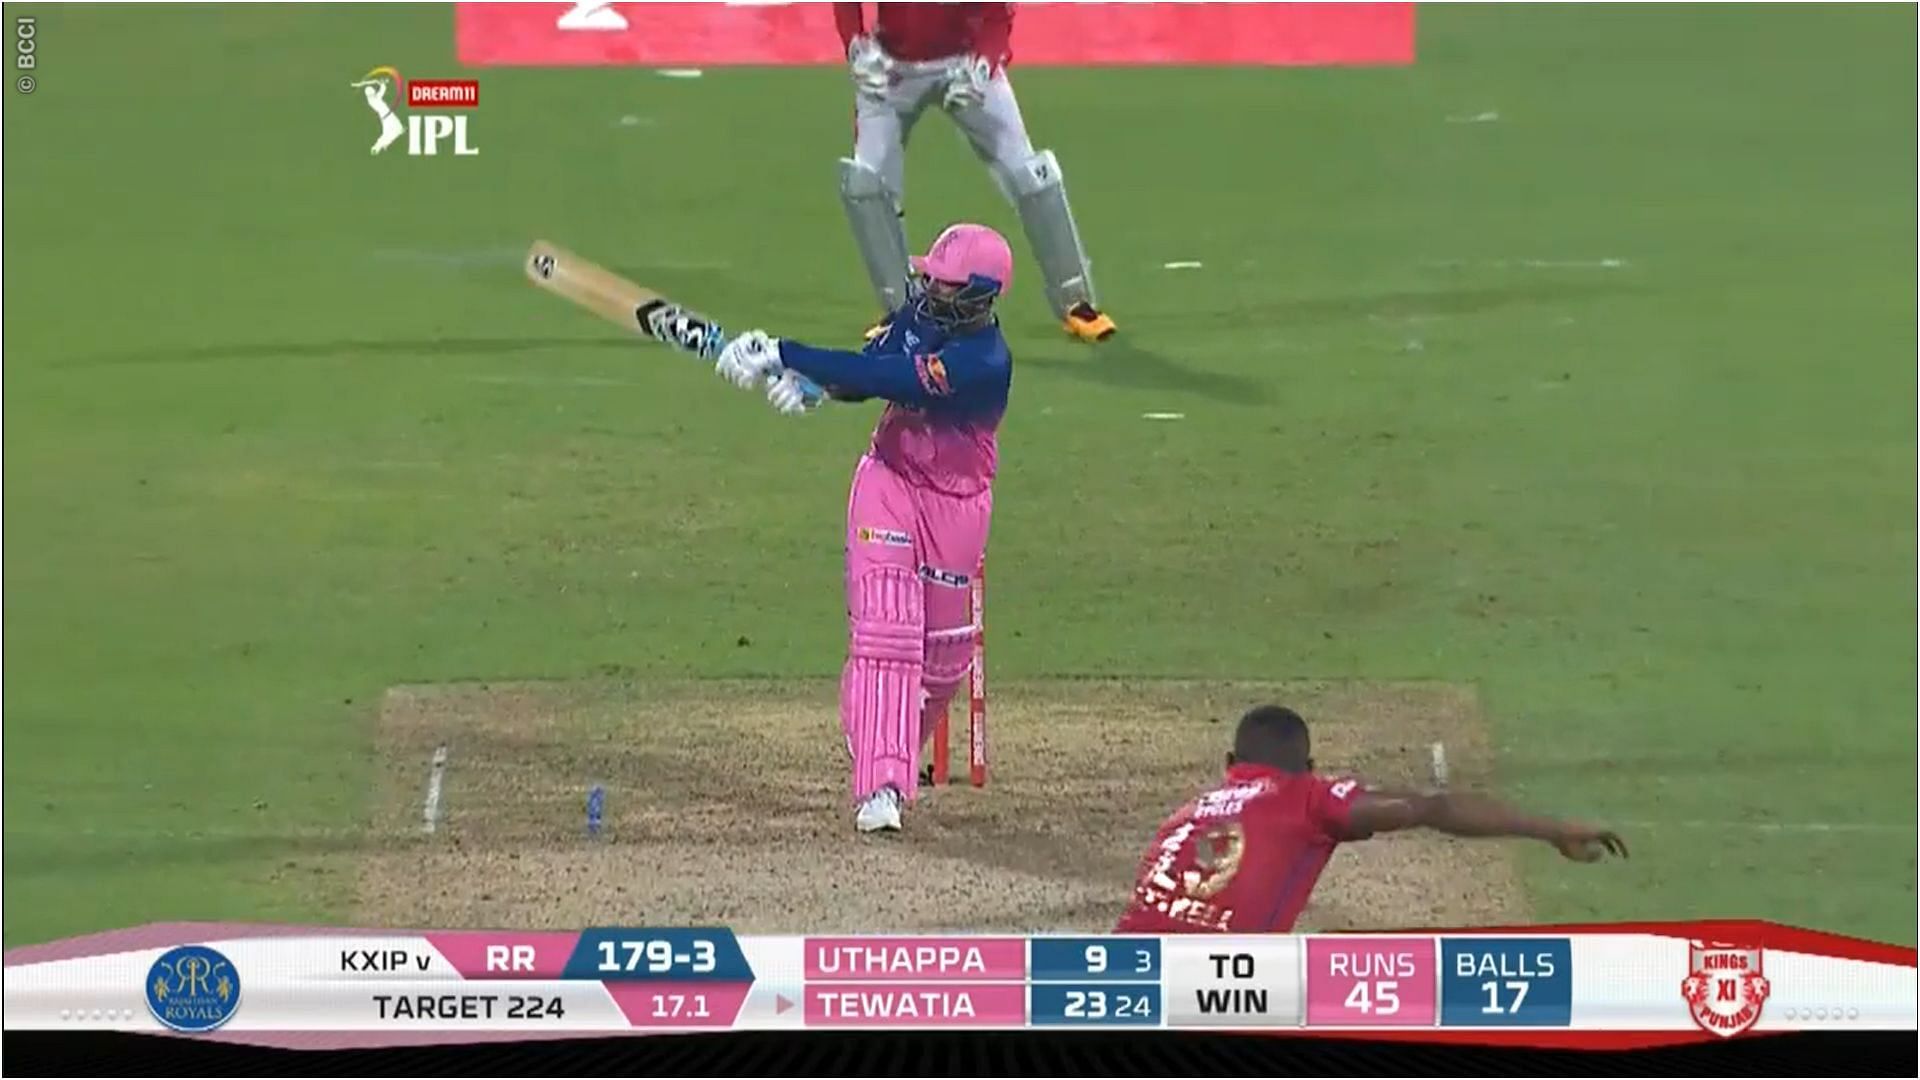 Rahul Tewatia in the course of hitting Cottrell for five sixes [iplt20.com]